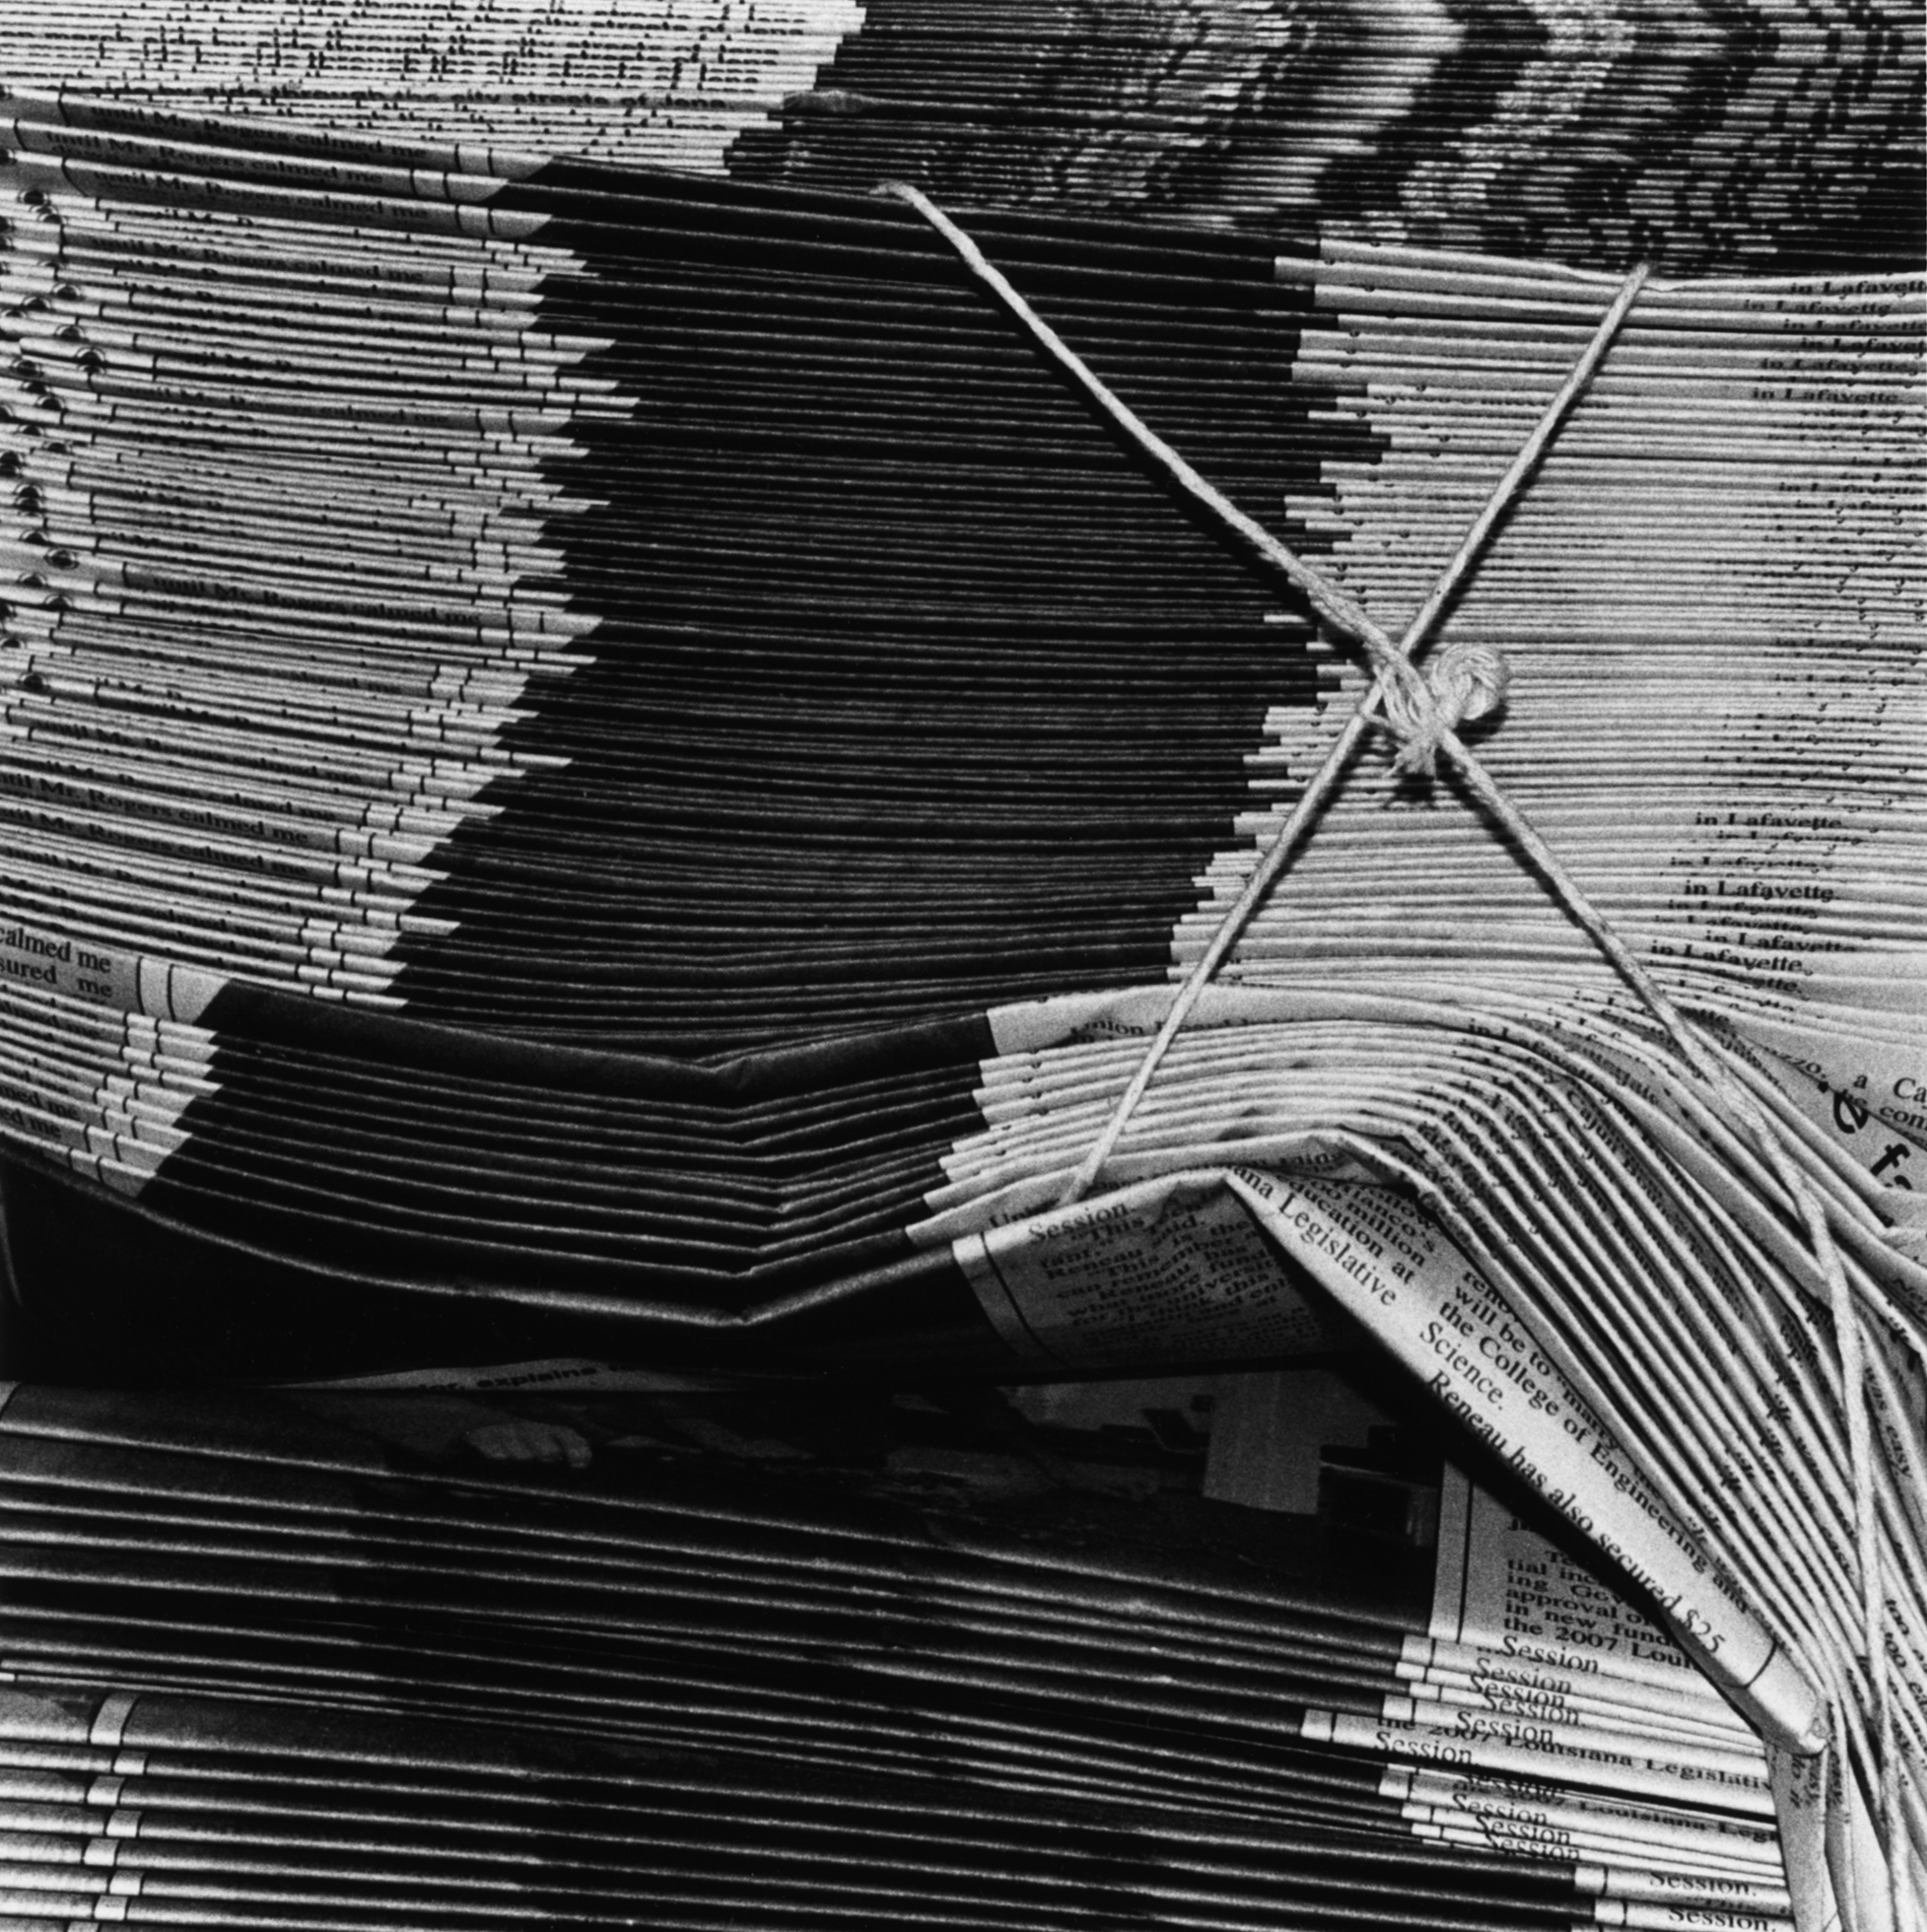 Close-up of stacks of newspapers bundled with string.